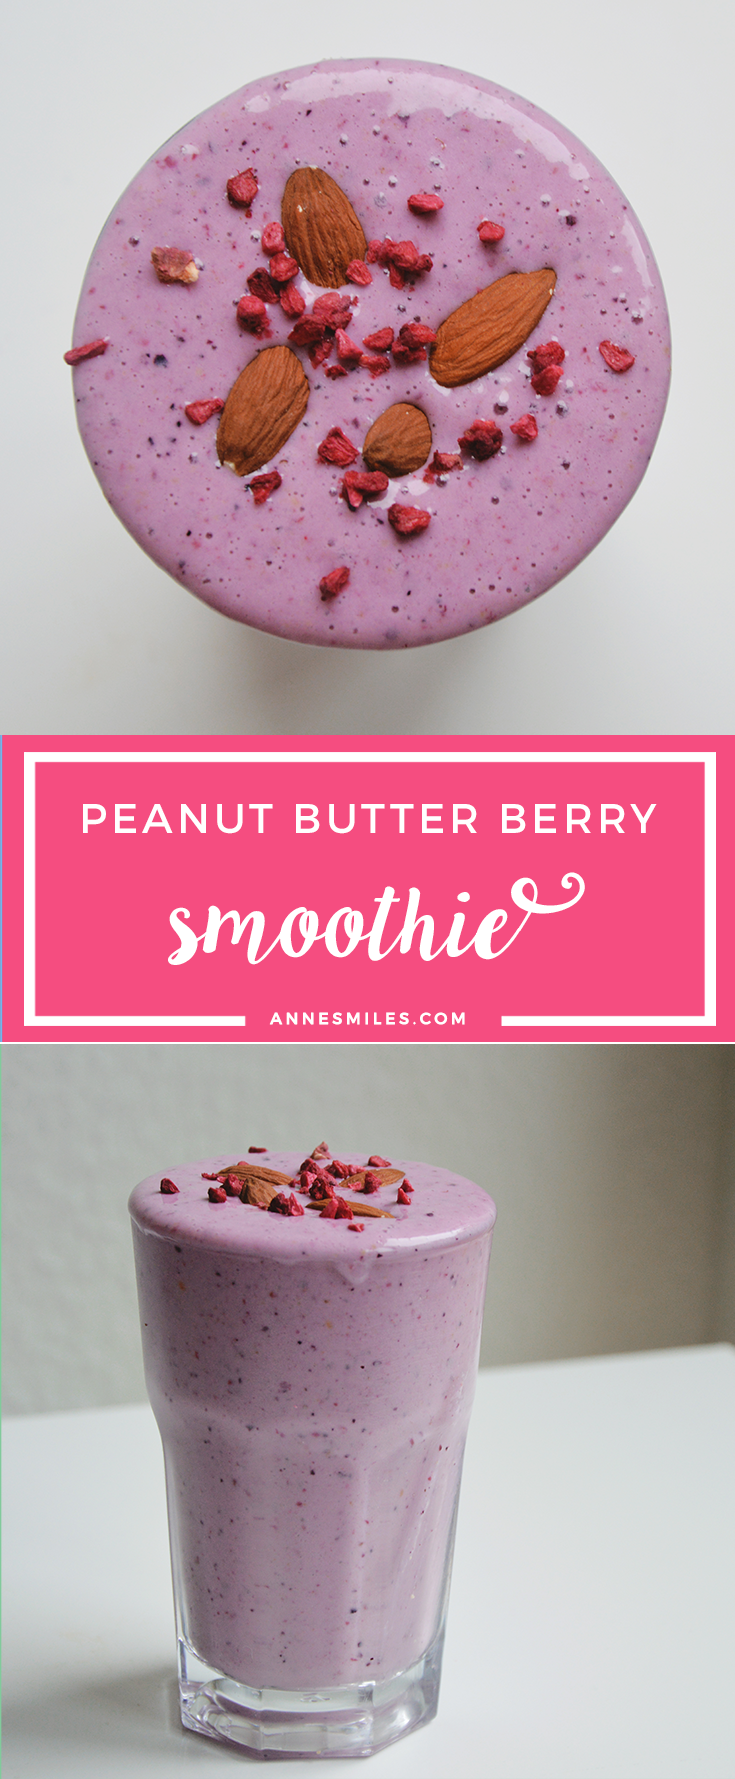 Healthy & tasty smoothie recipe with lots of berries and peanut butter. Yum! Click through to read more, or repin to save for